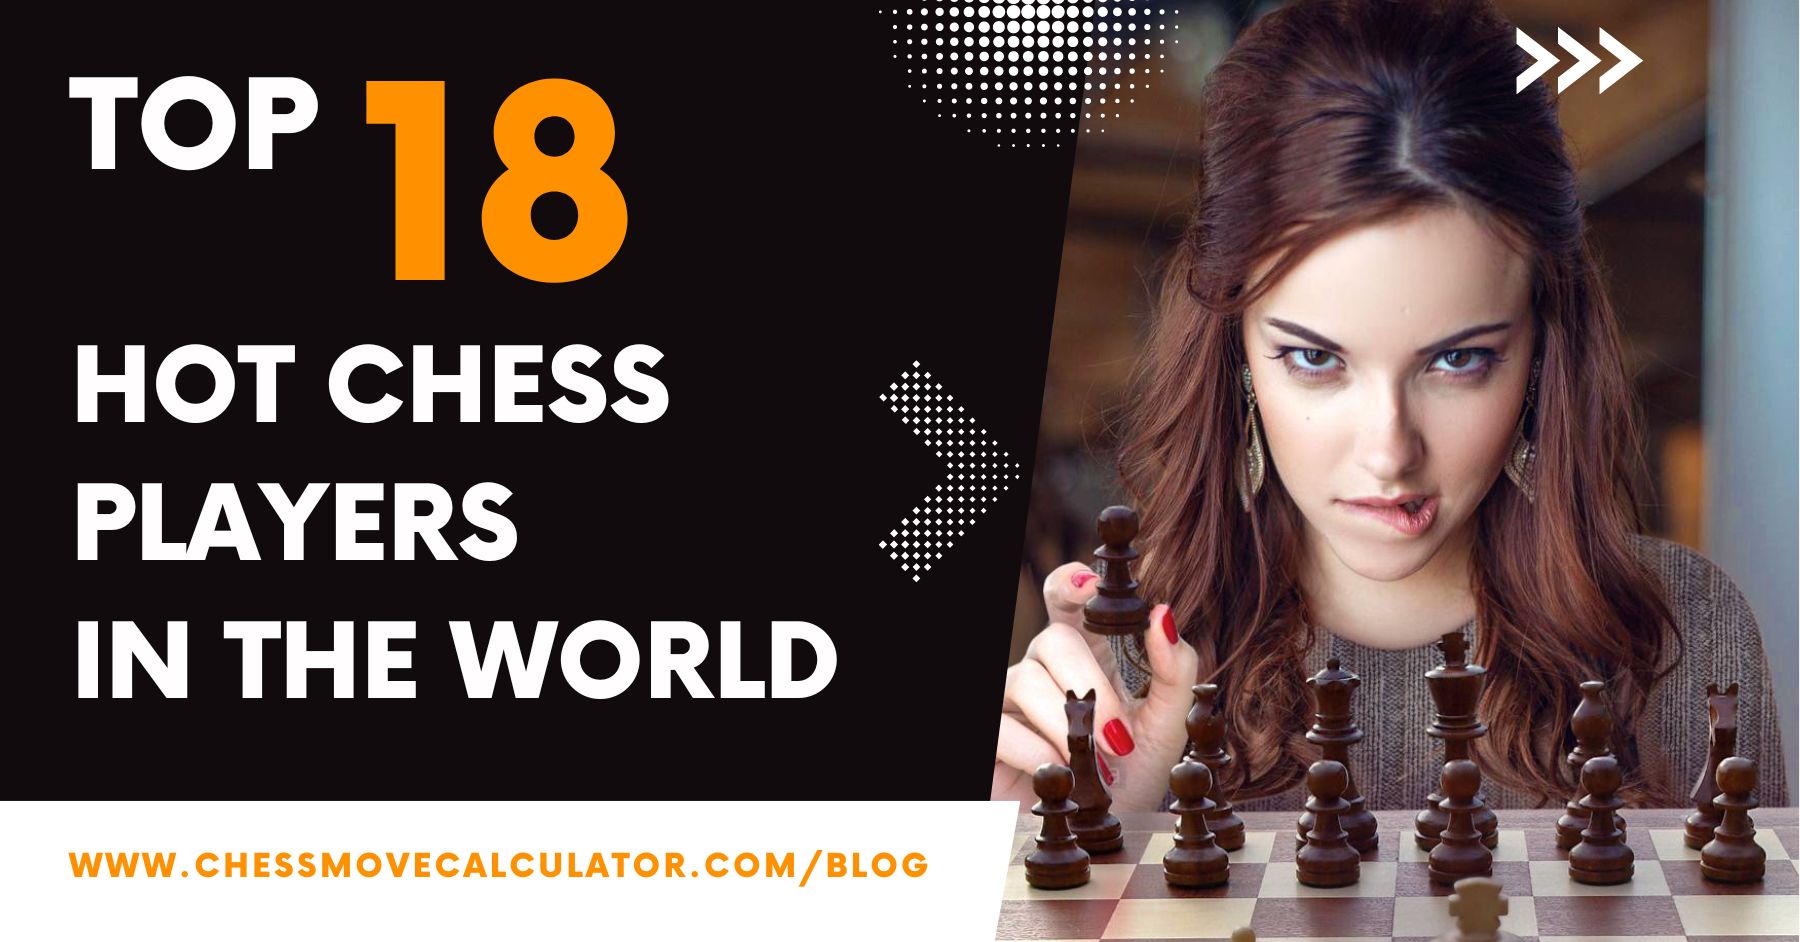 Hot Chess Players in the World